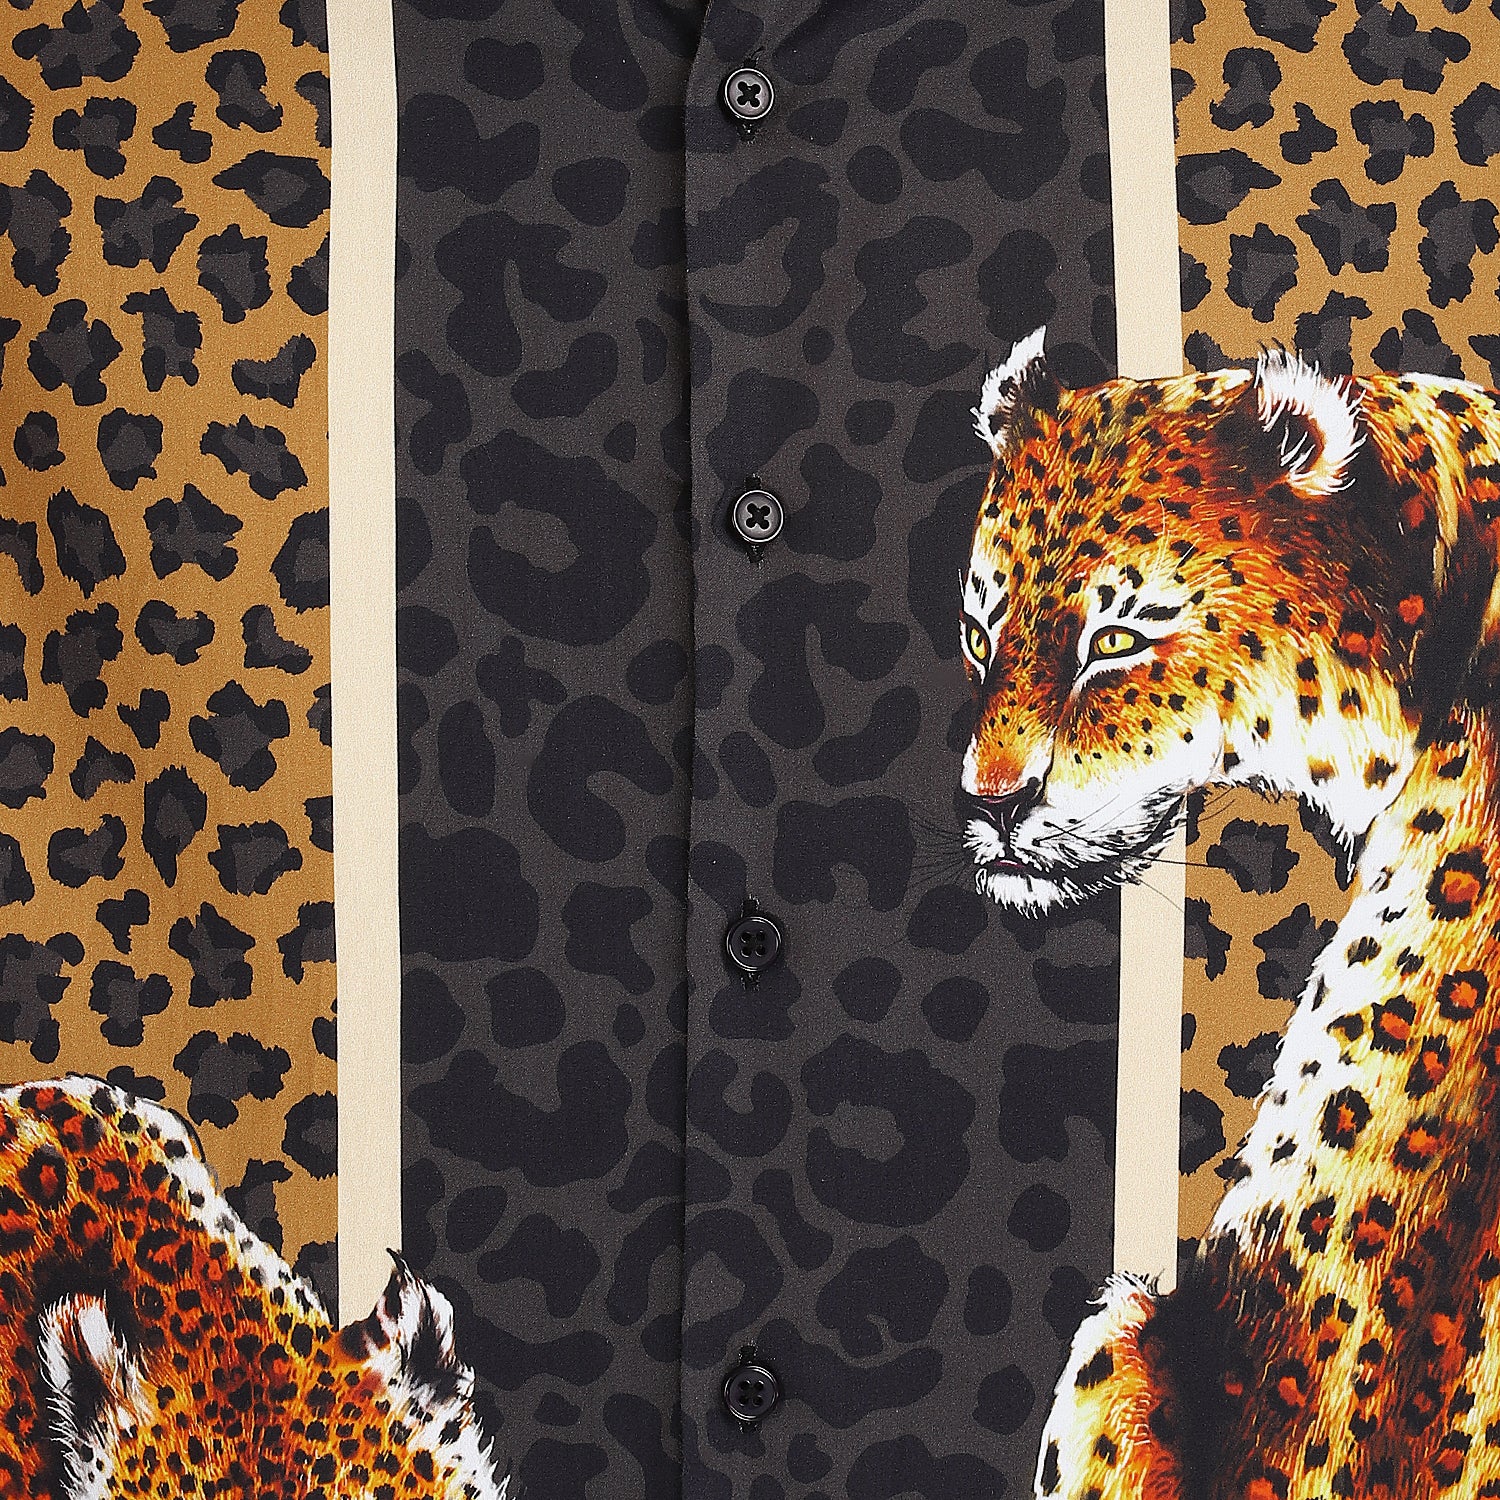 A 100% cotton luxury leopard print shirt, perfect for a night out or party with its eye-catching design and comfortable fabric